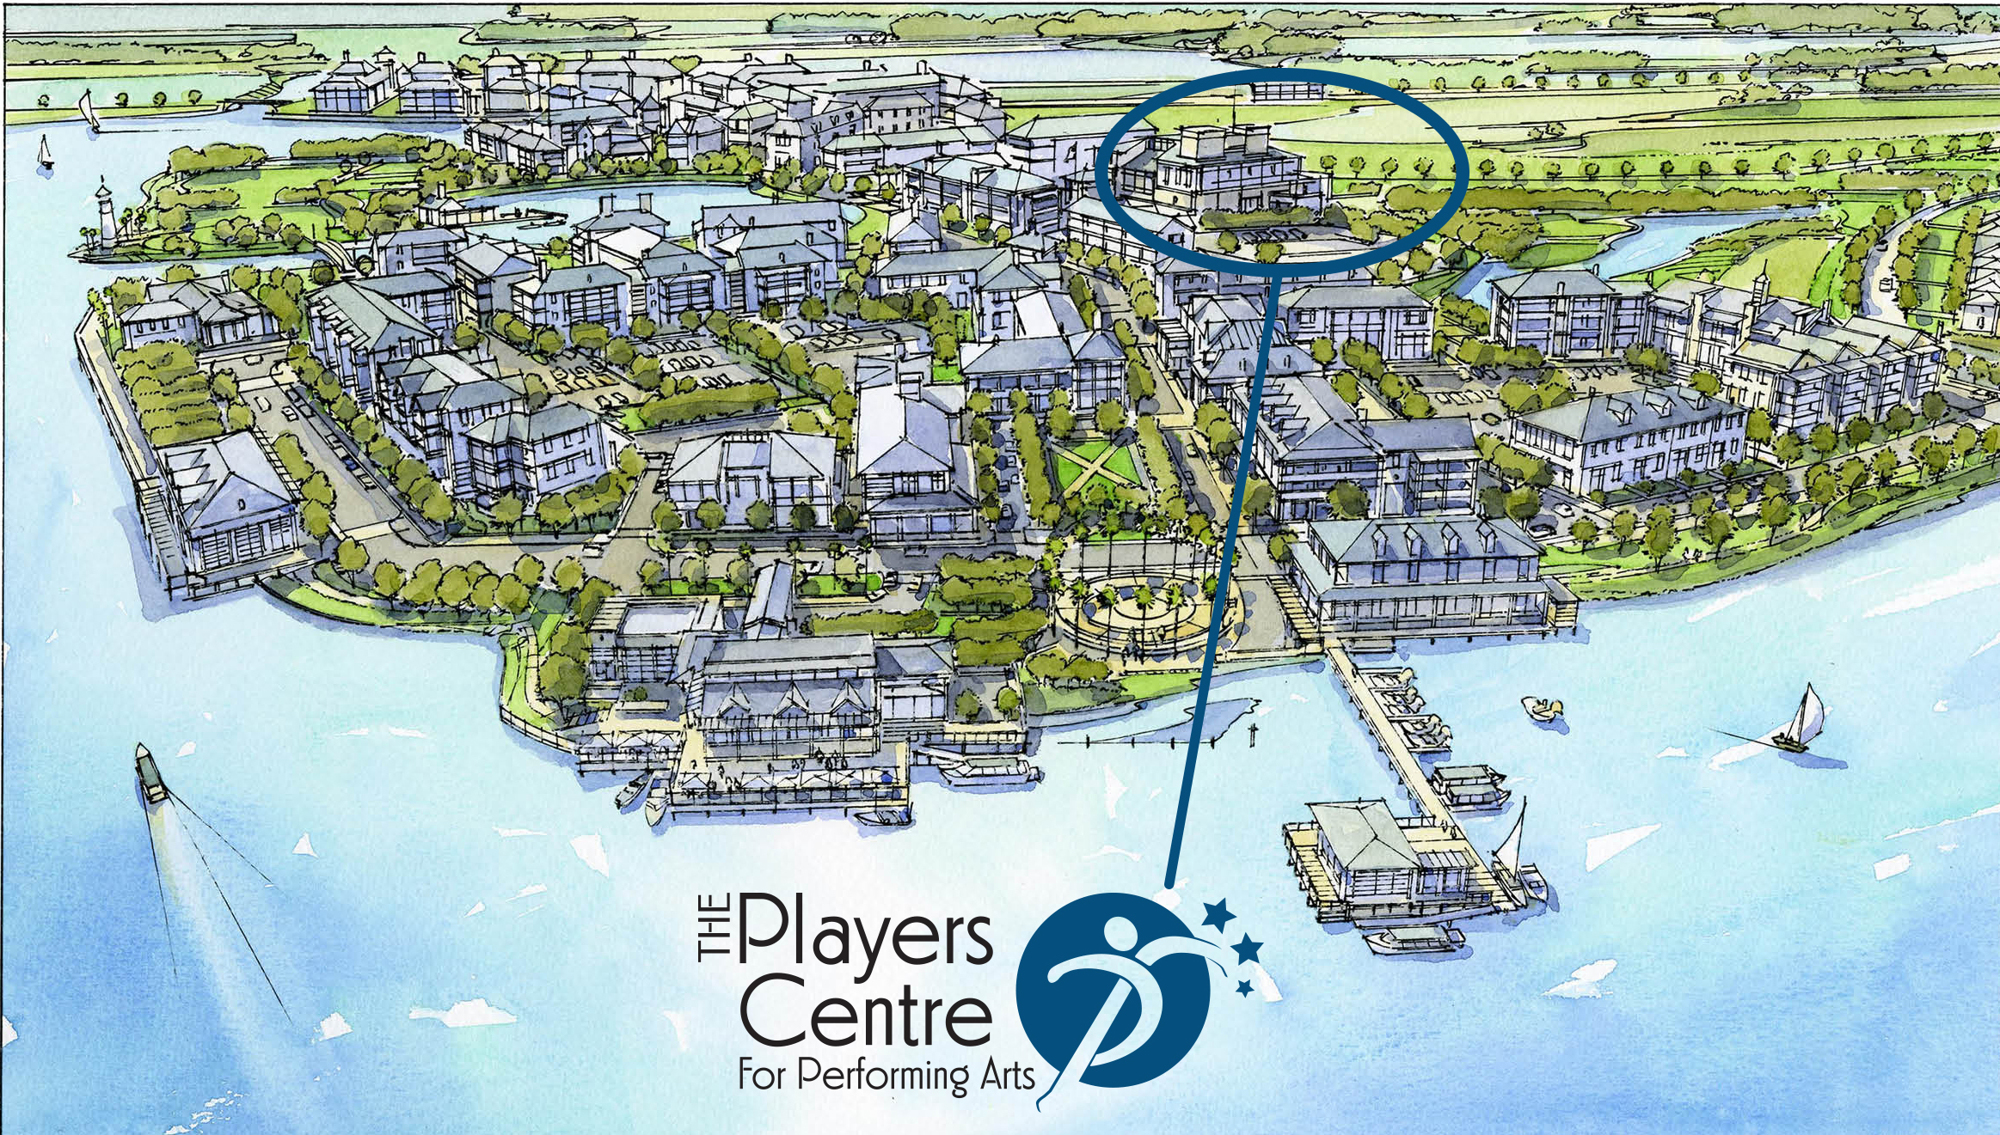 The Players Centre for the Performing Arts will have three performance spaces in its new location, while also anchoring the town center of Lakewood Ranch's  Waterside development.